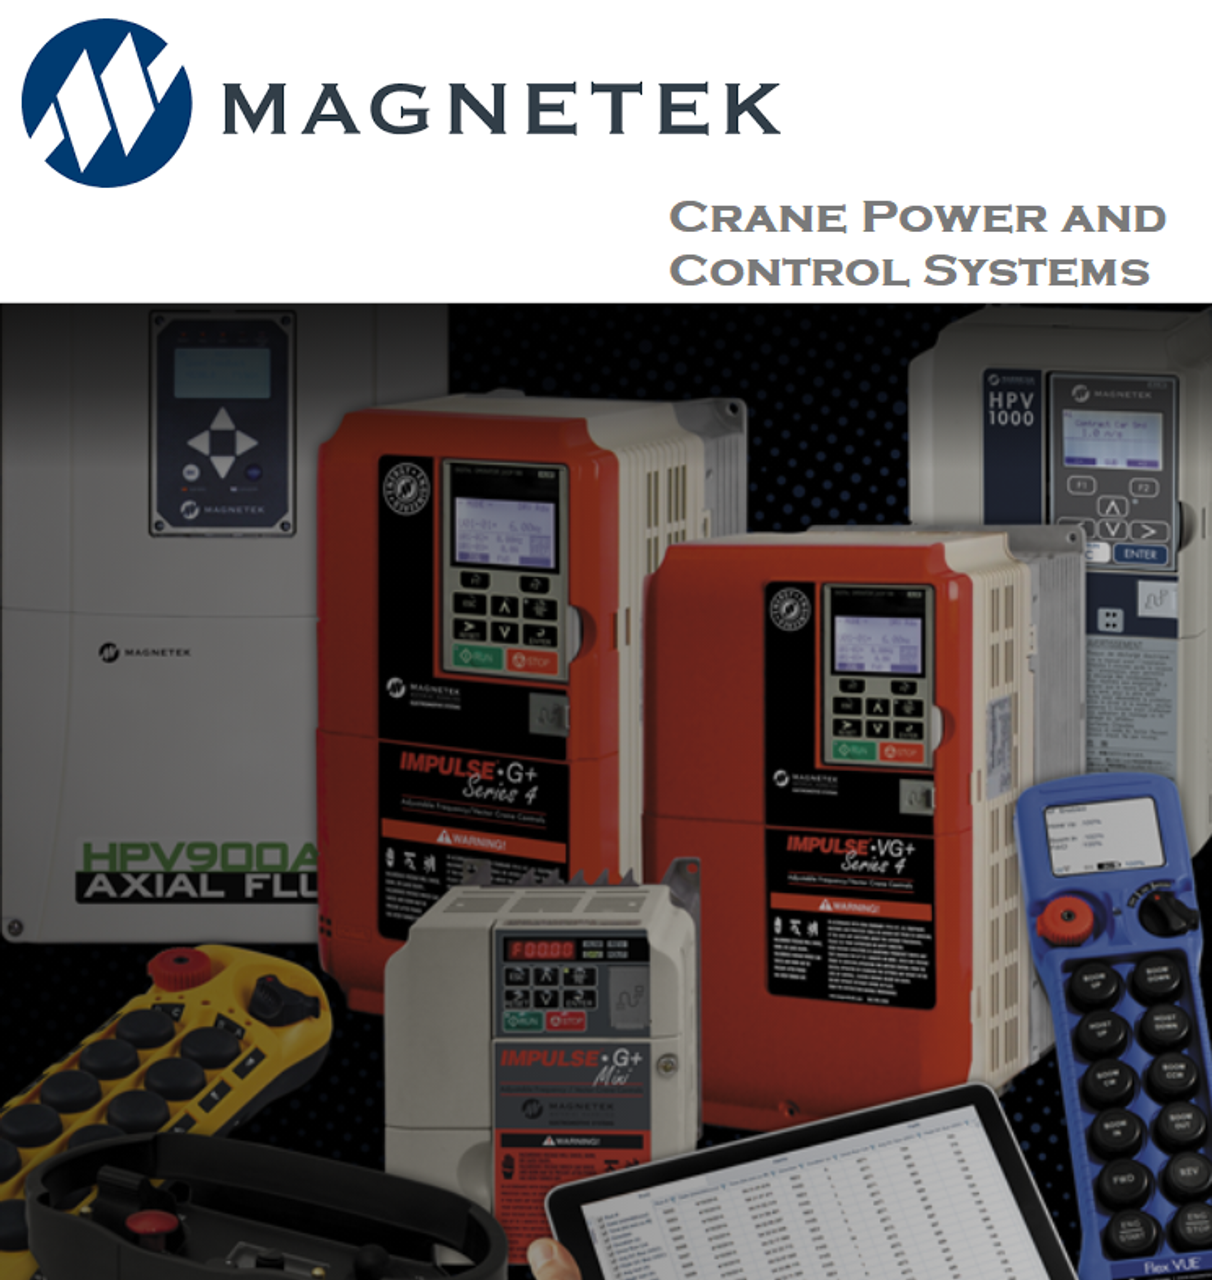 Magnetek Crane Power and Control Systems